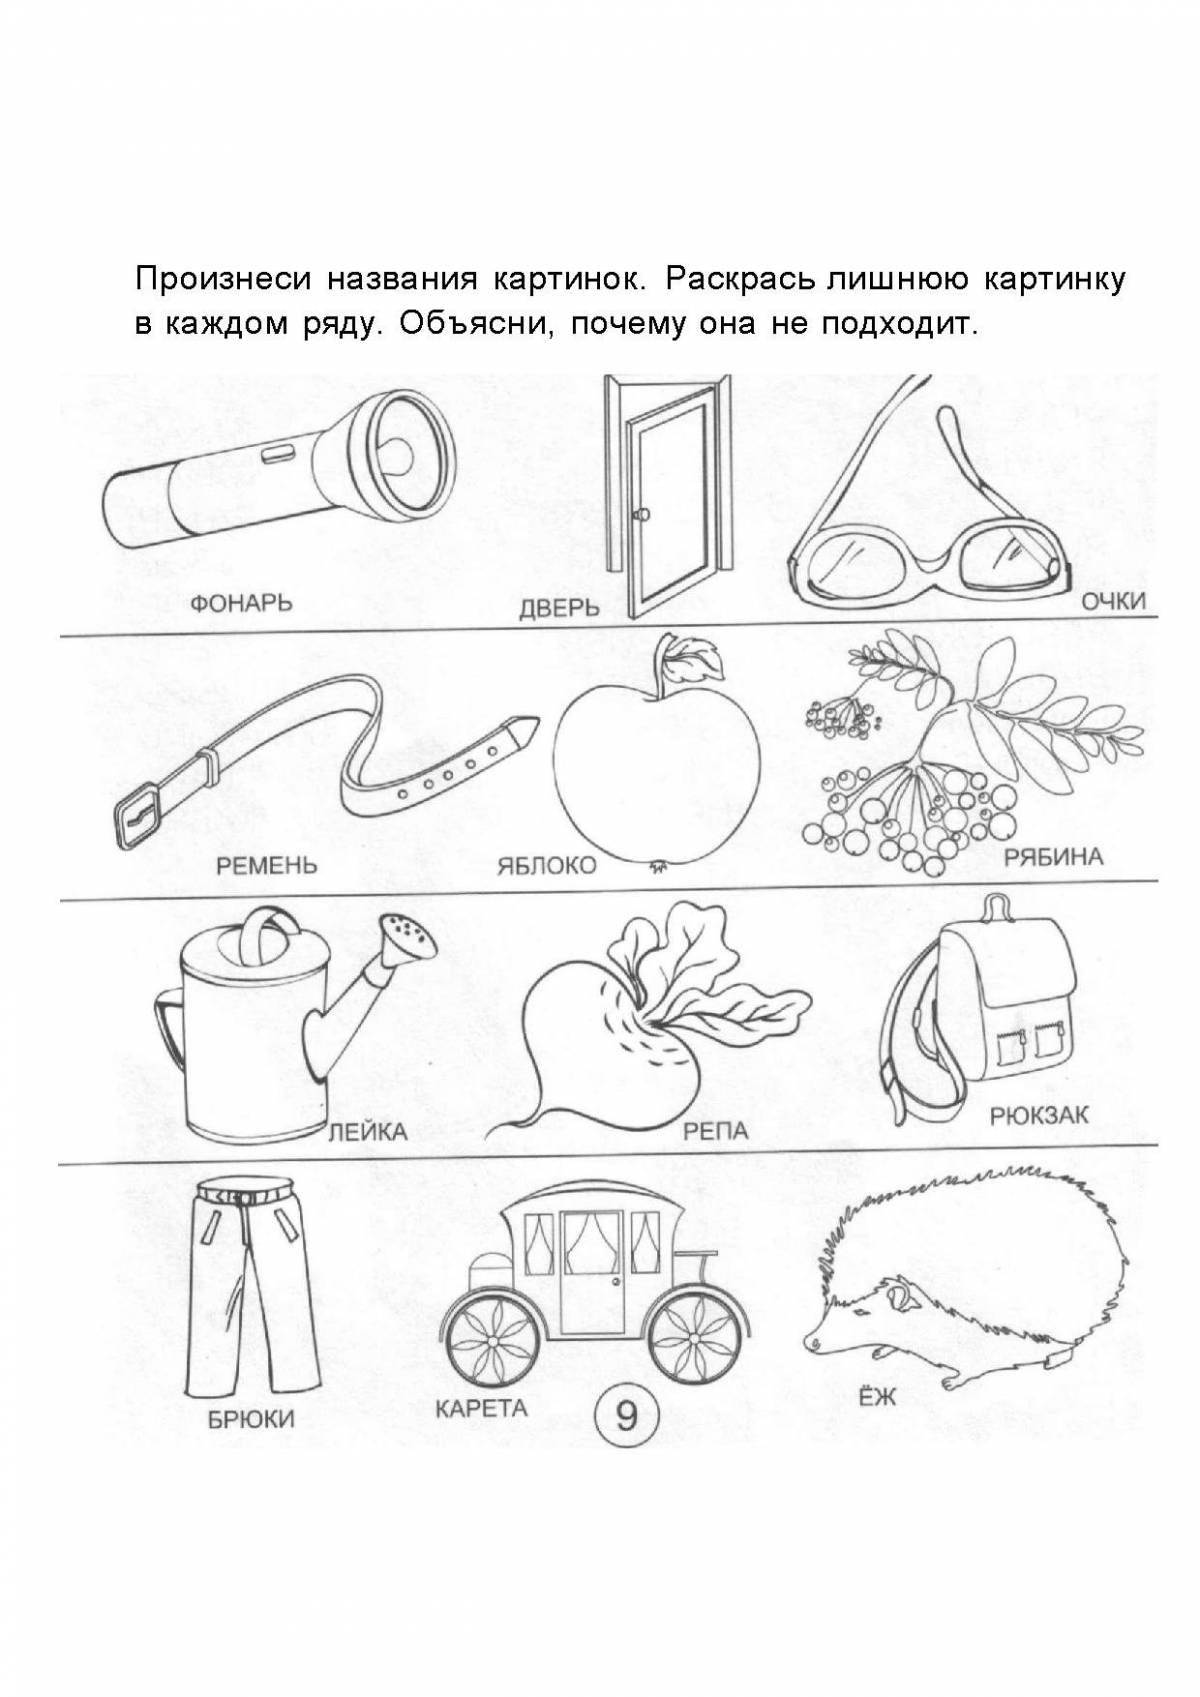 Speech therapist sound coloring page